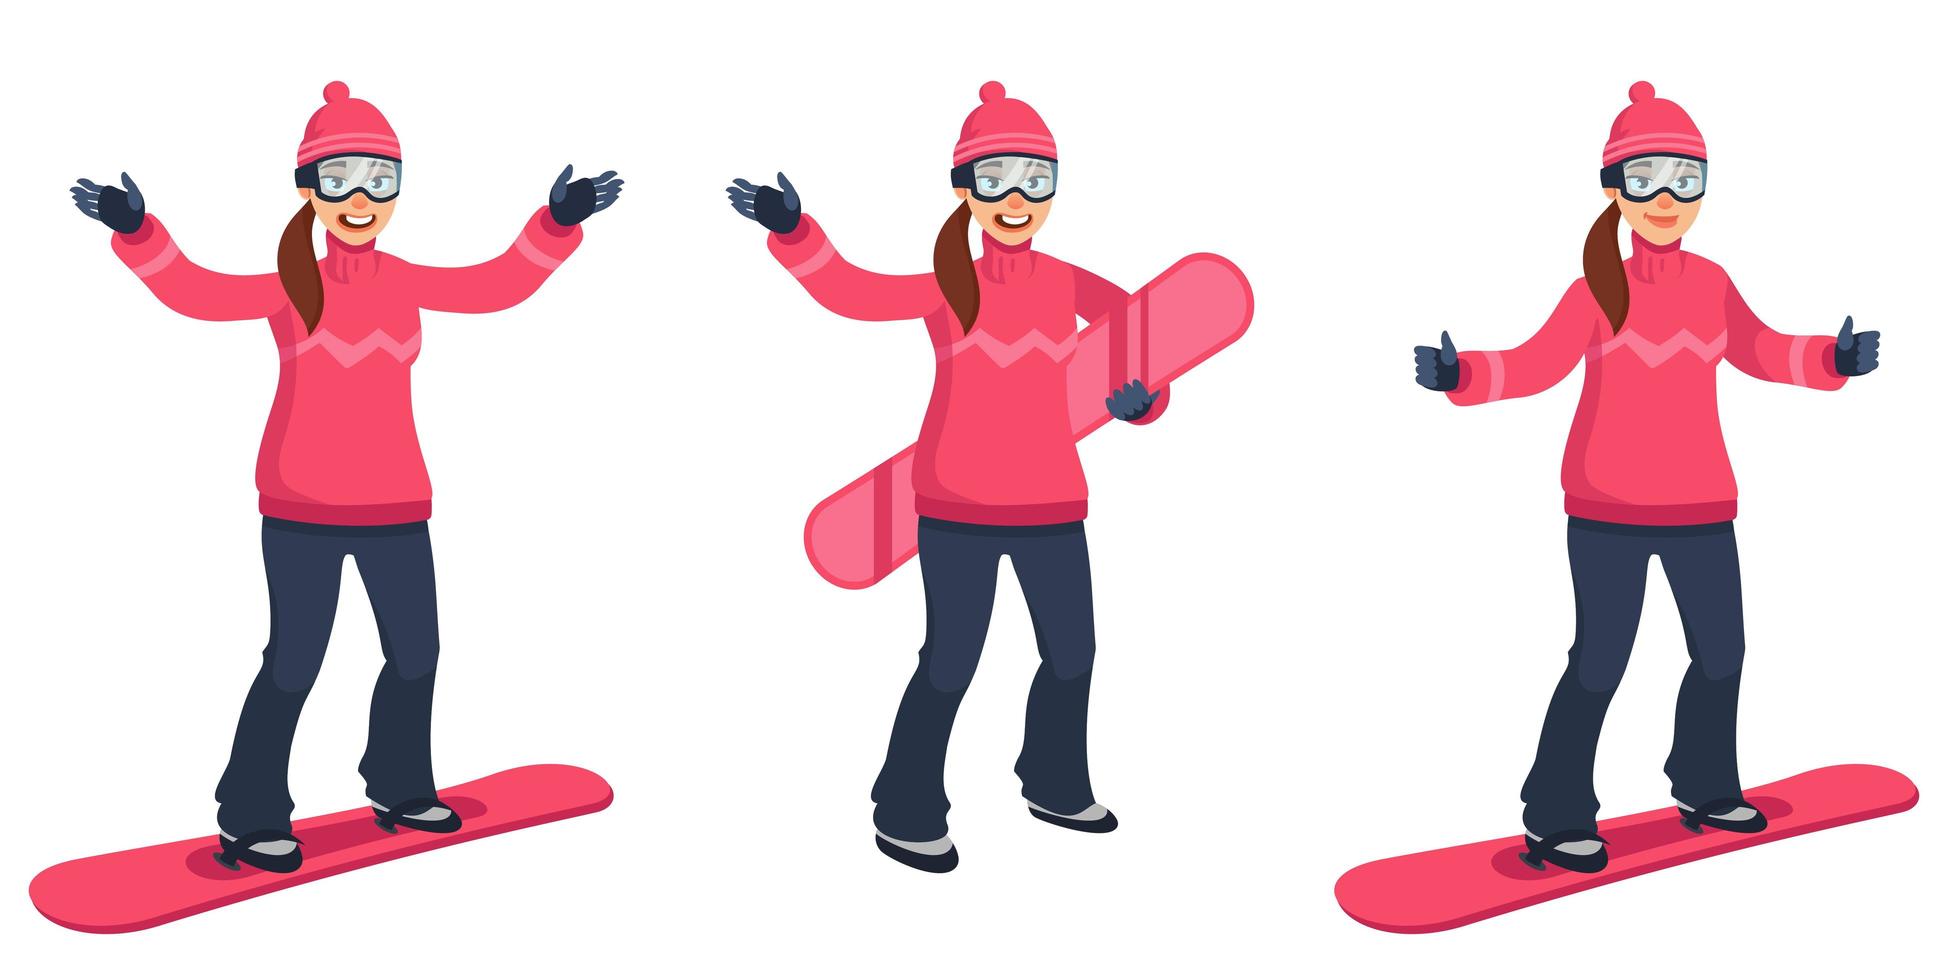 Snowboarder in different poses. vector